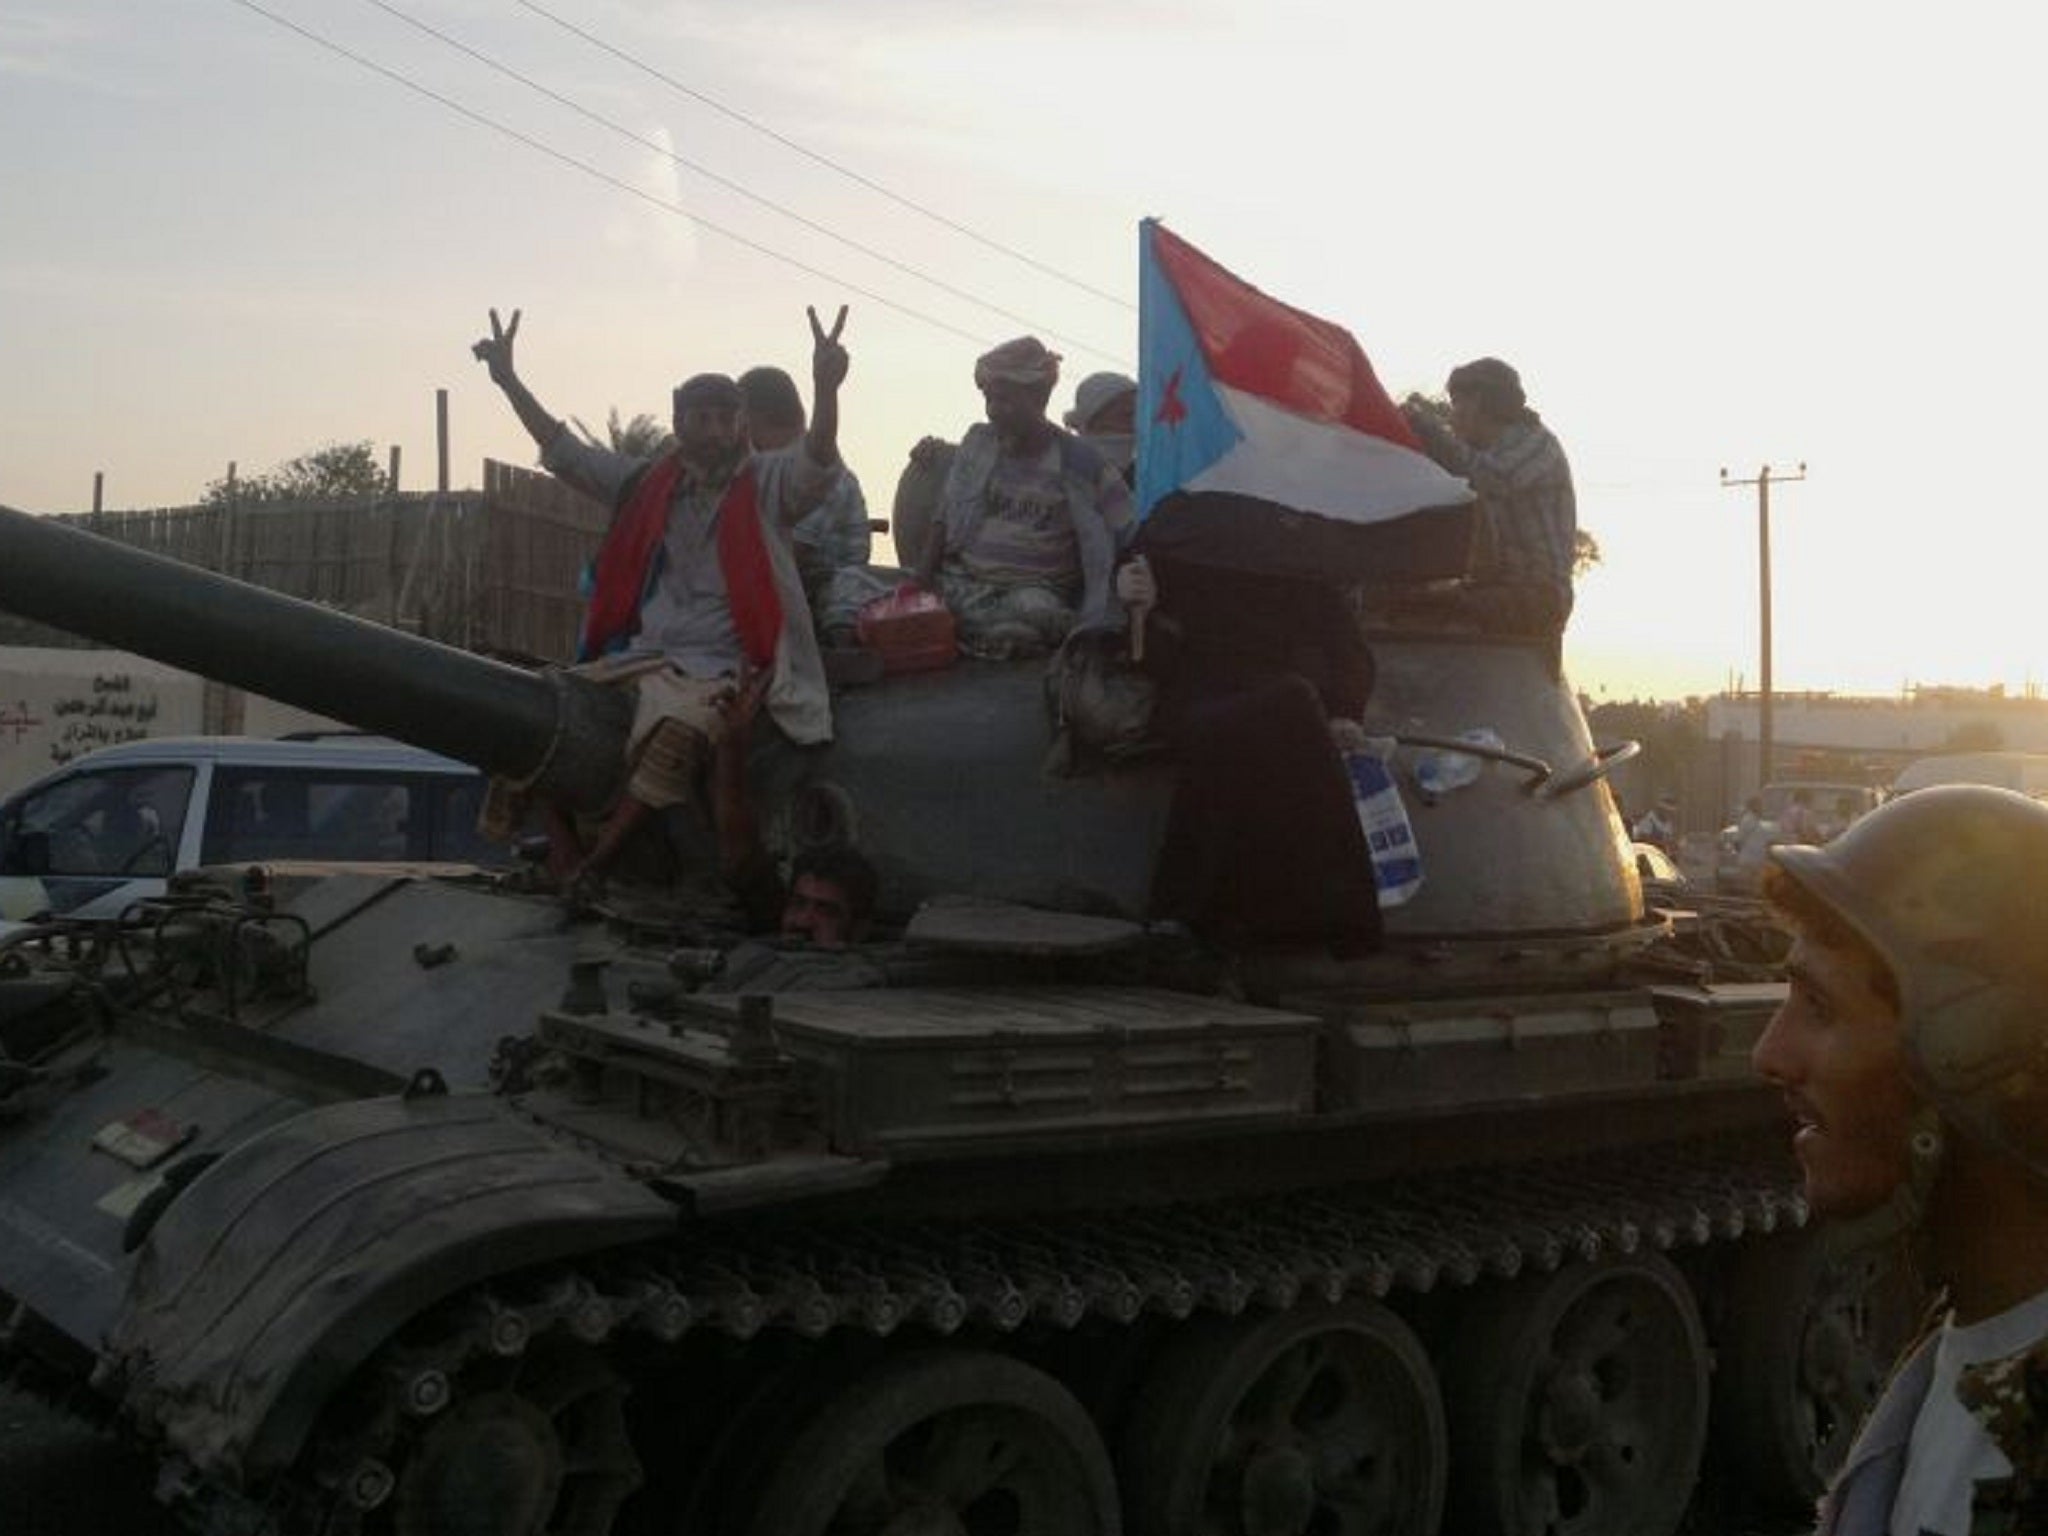 Soldiers loyal to expelled president Hadi ride on a tank in Aden, Yemen